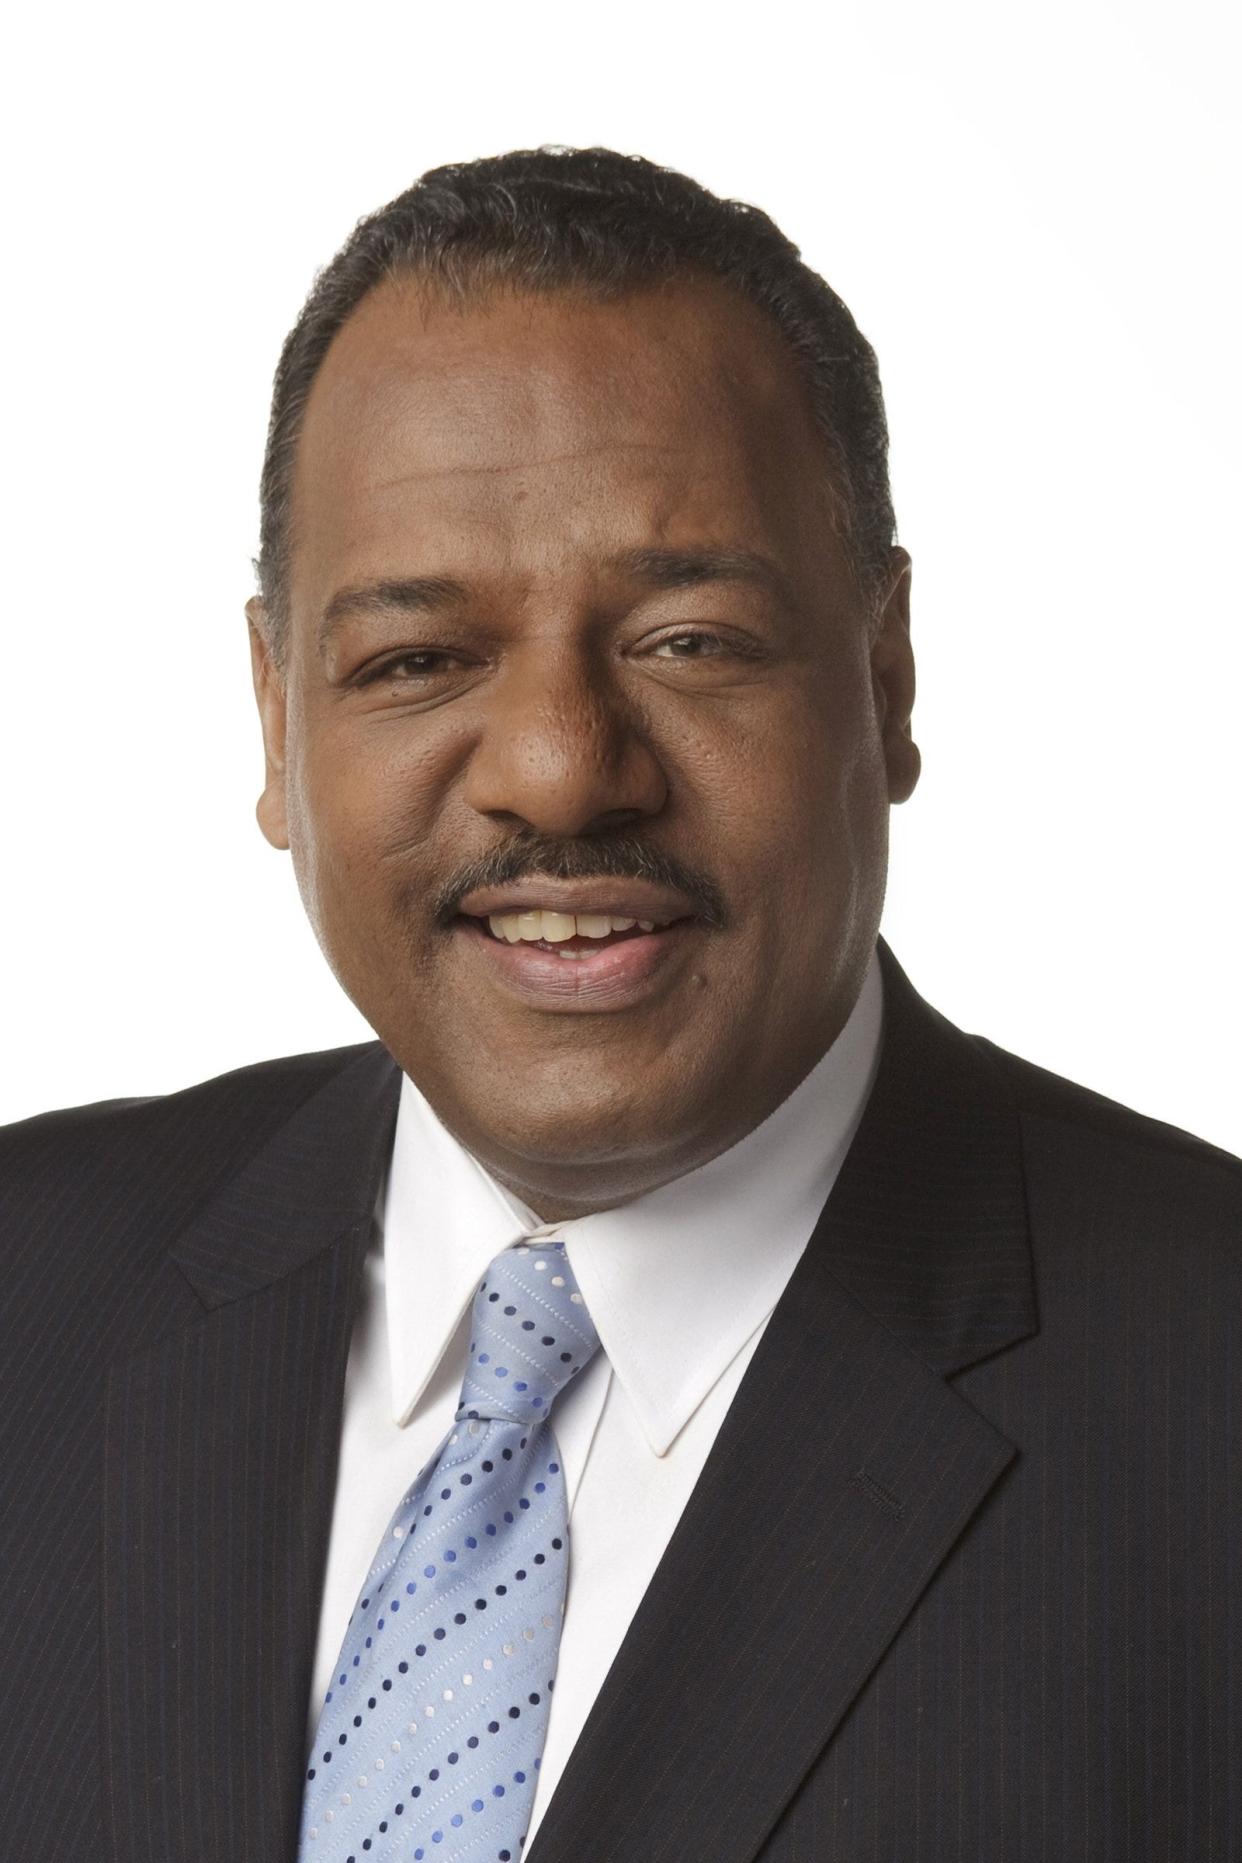 Former NBC4 (WCMH-TV) news anchor Mike Jackson is now fighting cancer after suffering a stroke in 2019.